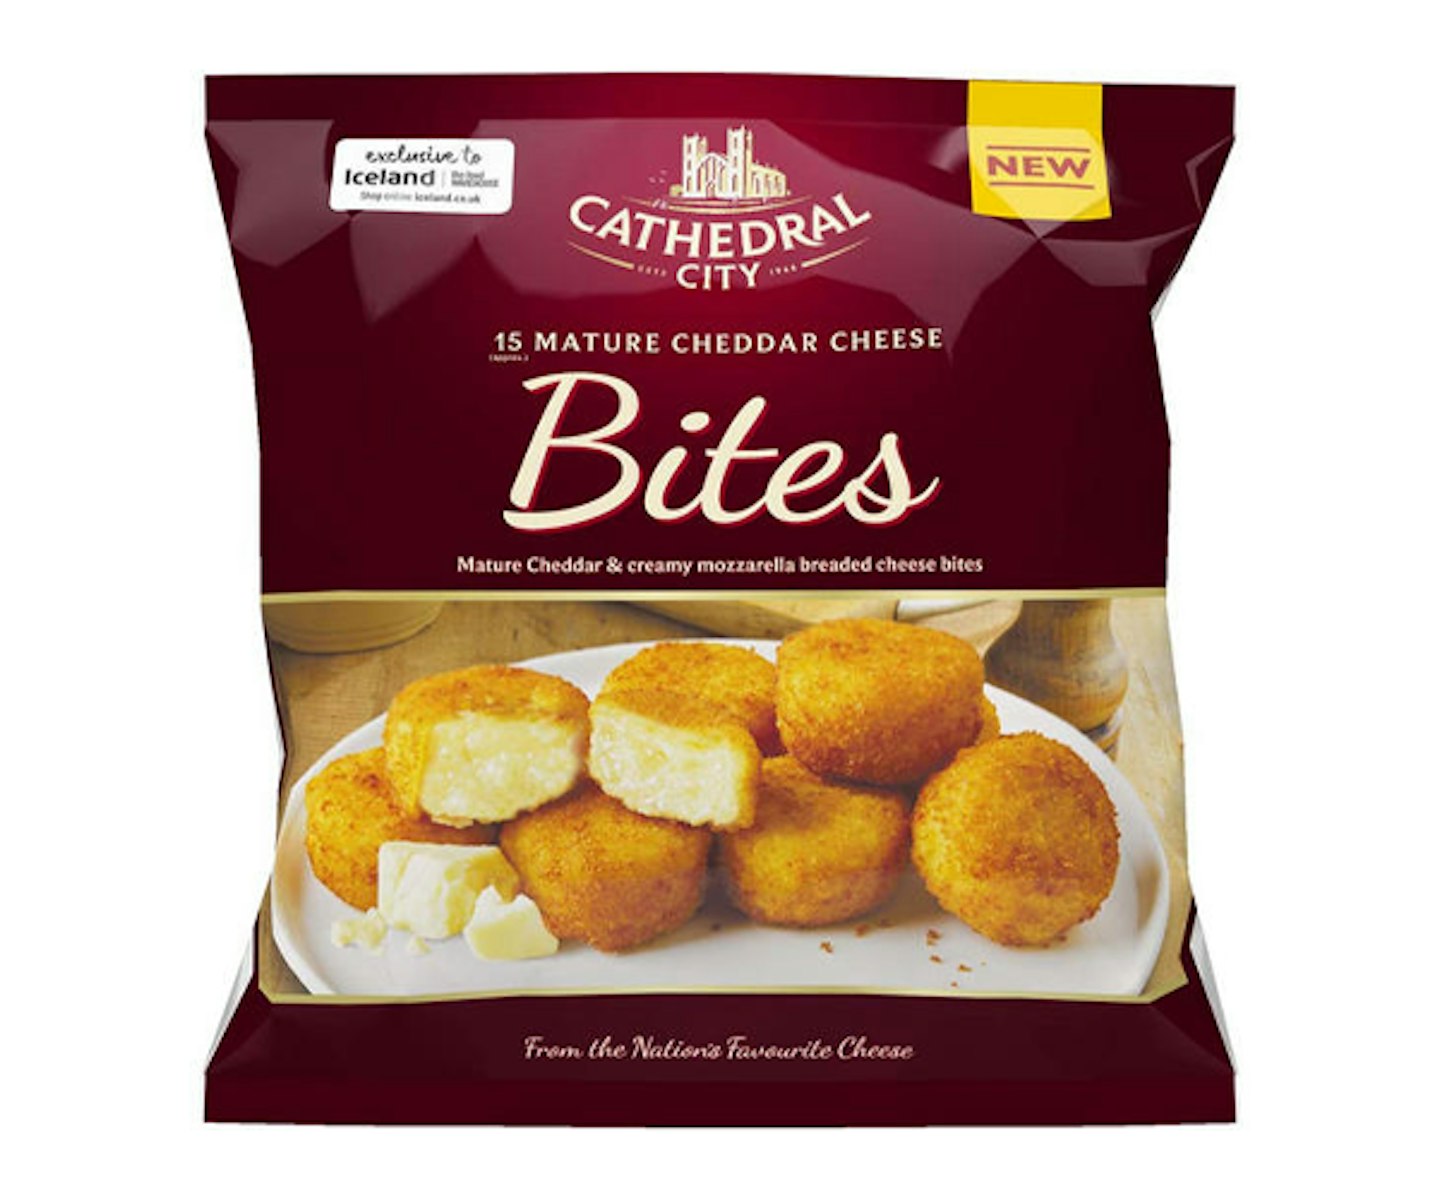 Cathedral City 15 (approx.) Mature Cheddar Cheese Bites 375g